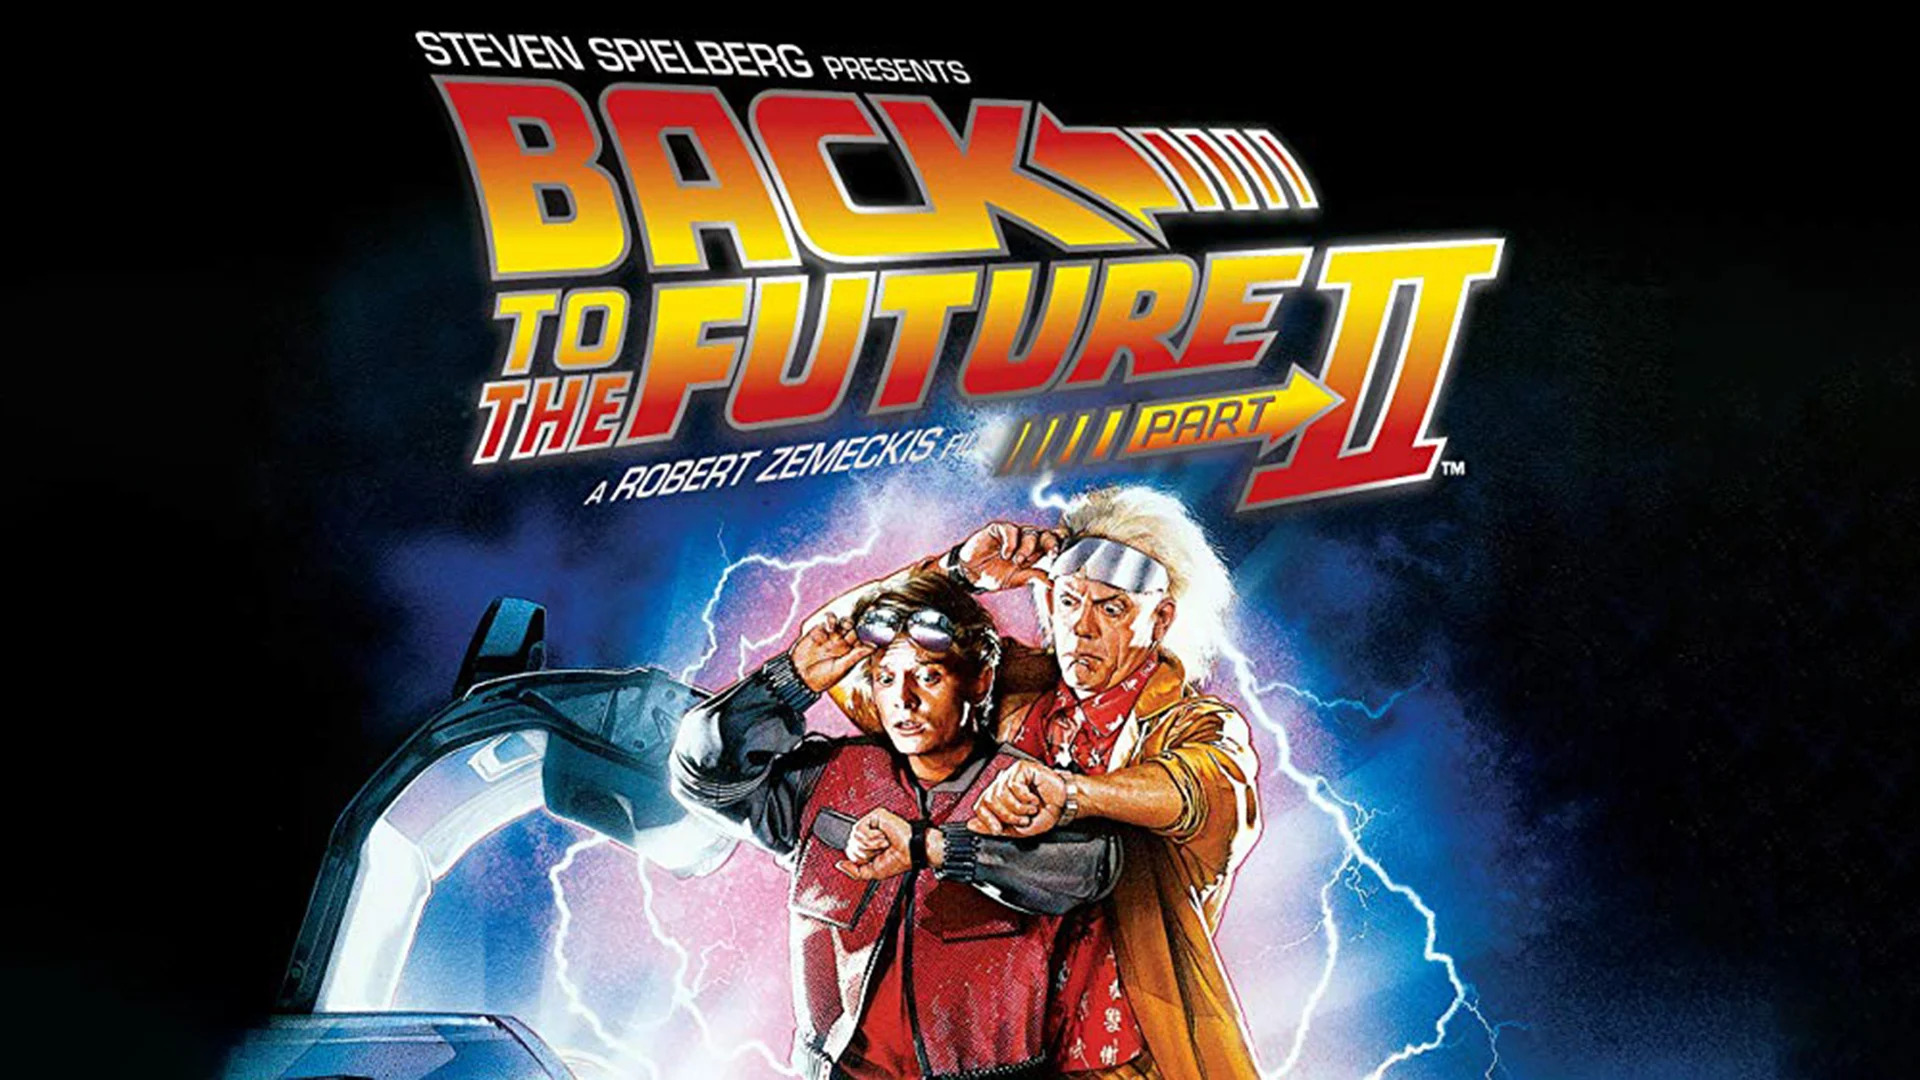 Back to the Future Part III is actually the best sequel in the franchise